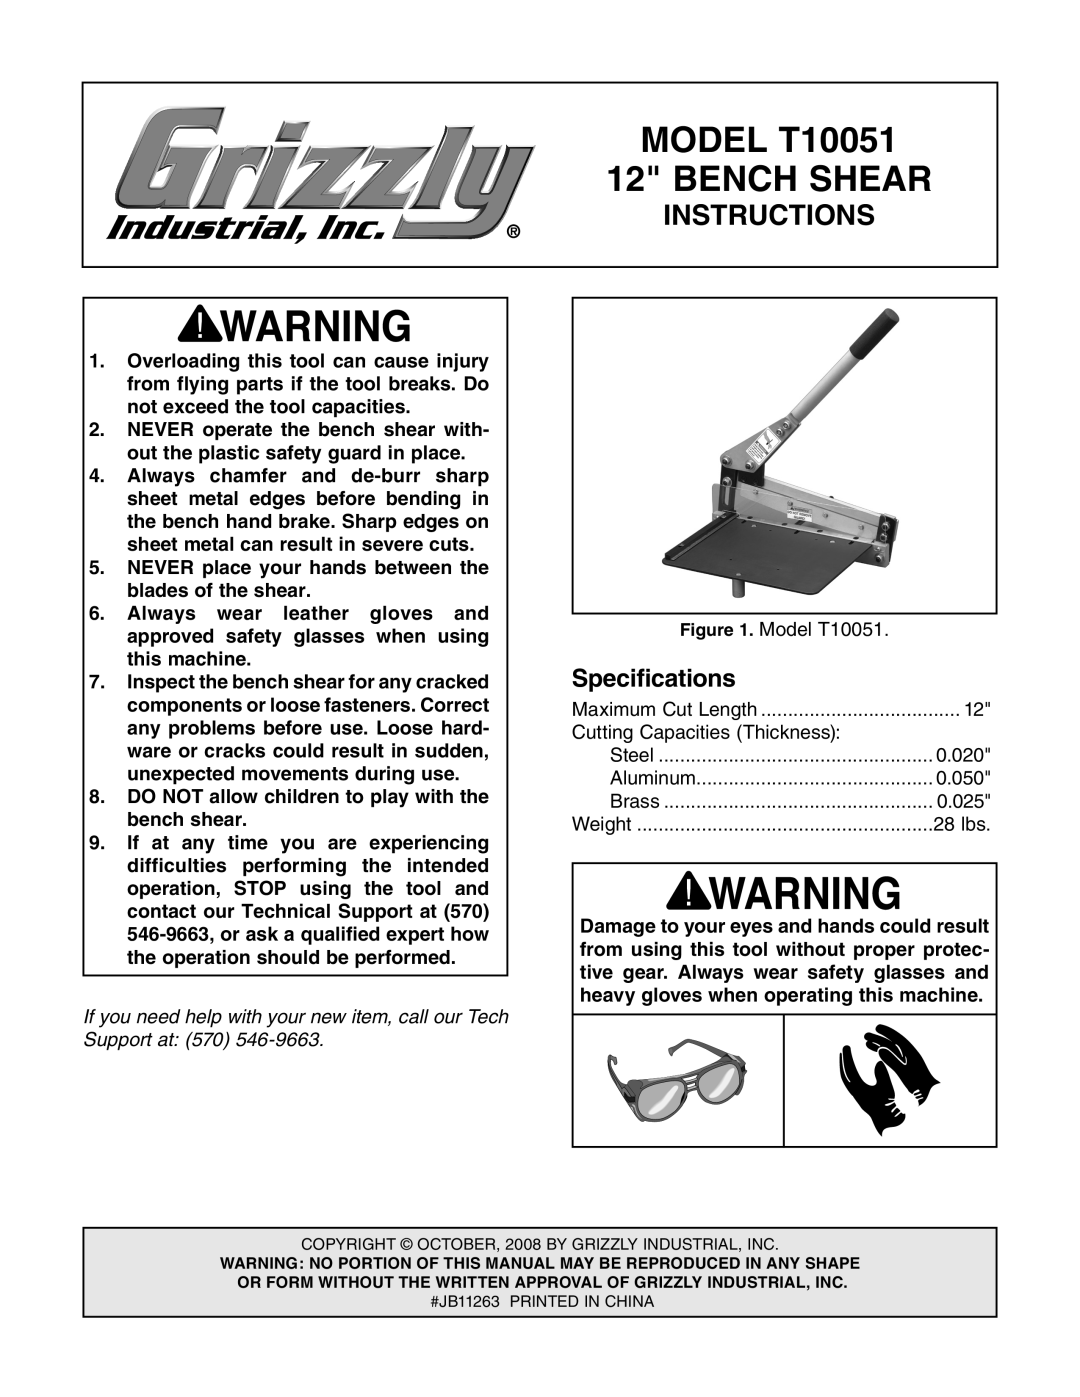 Grizzly specifications Specifications, MODEL T10051, Bench Shear, Instructions 